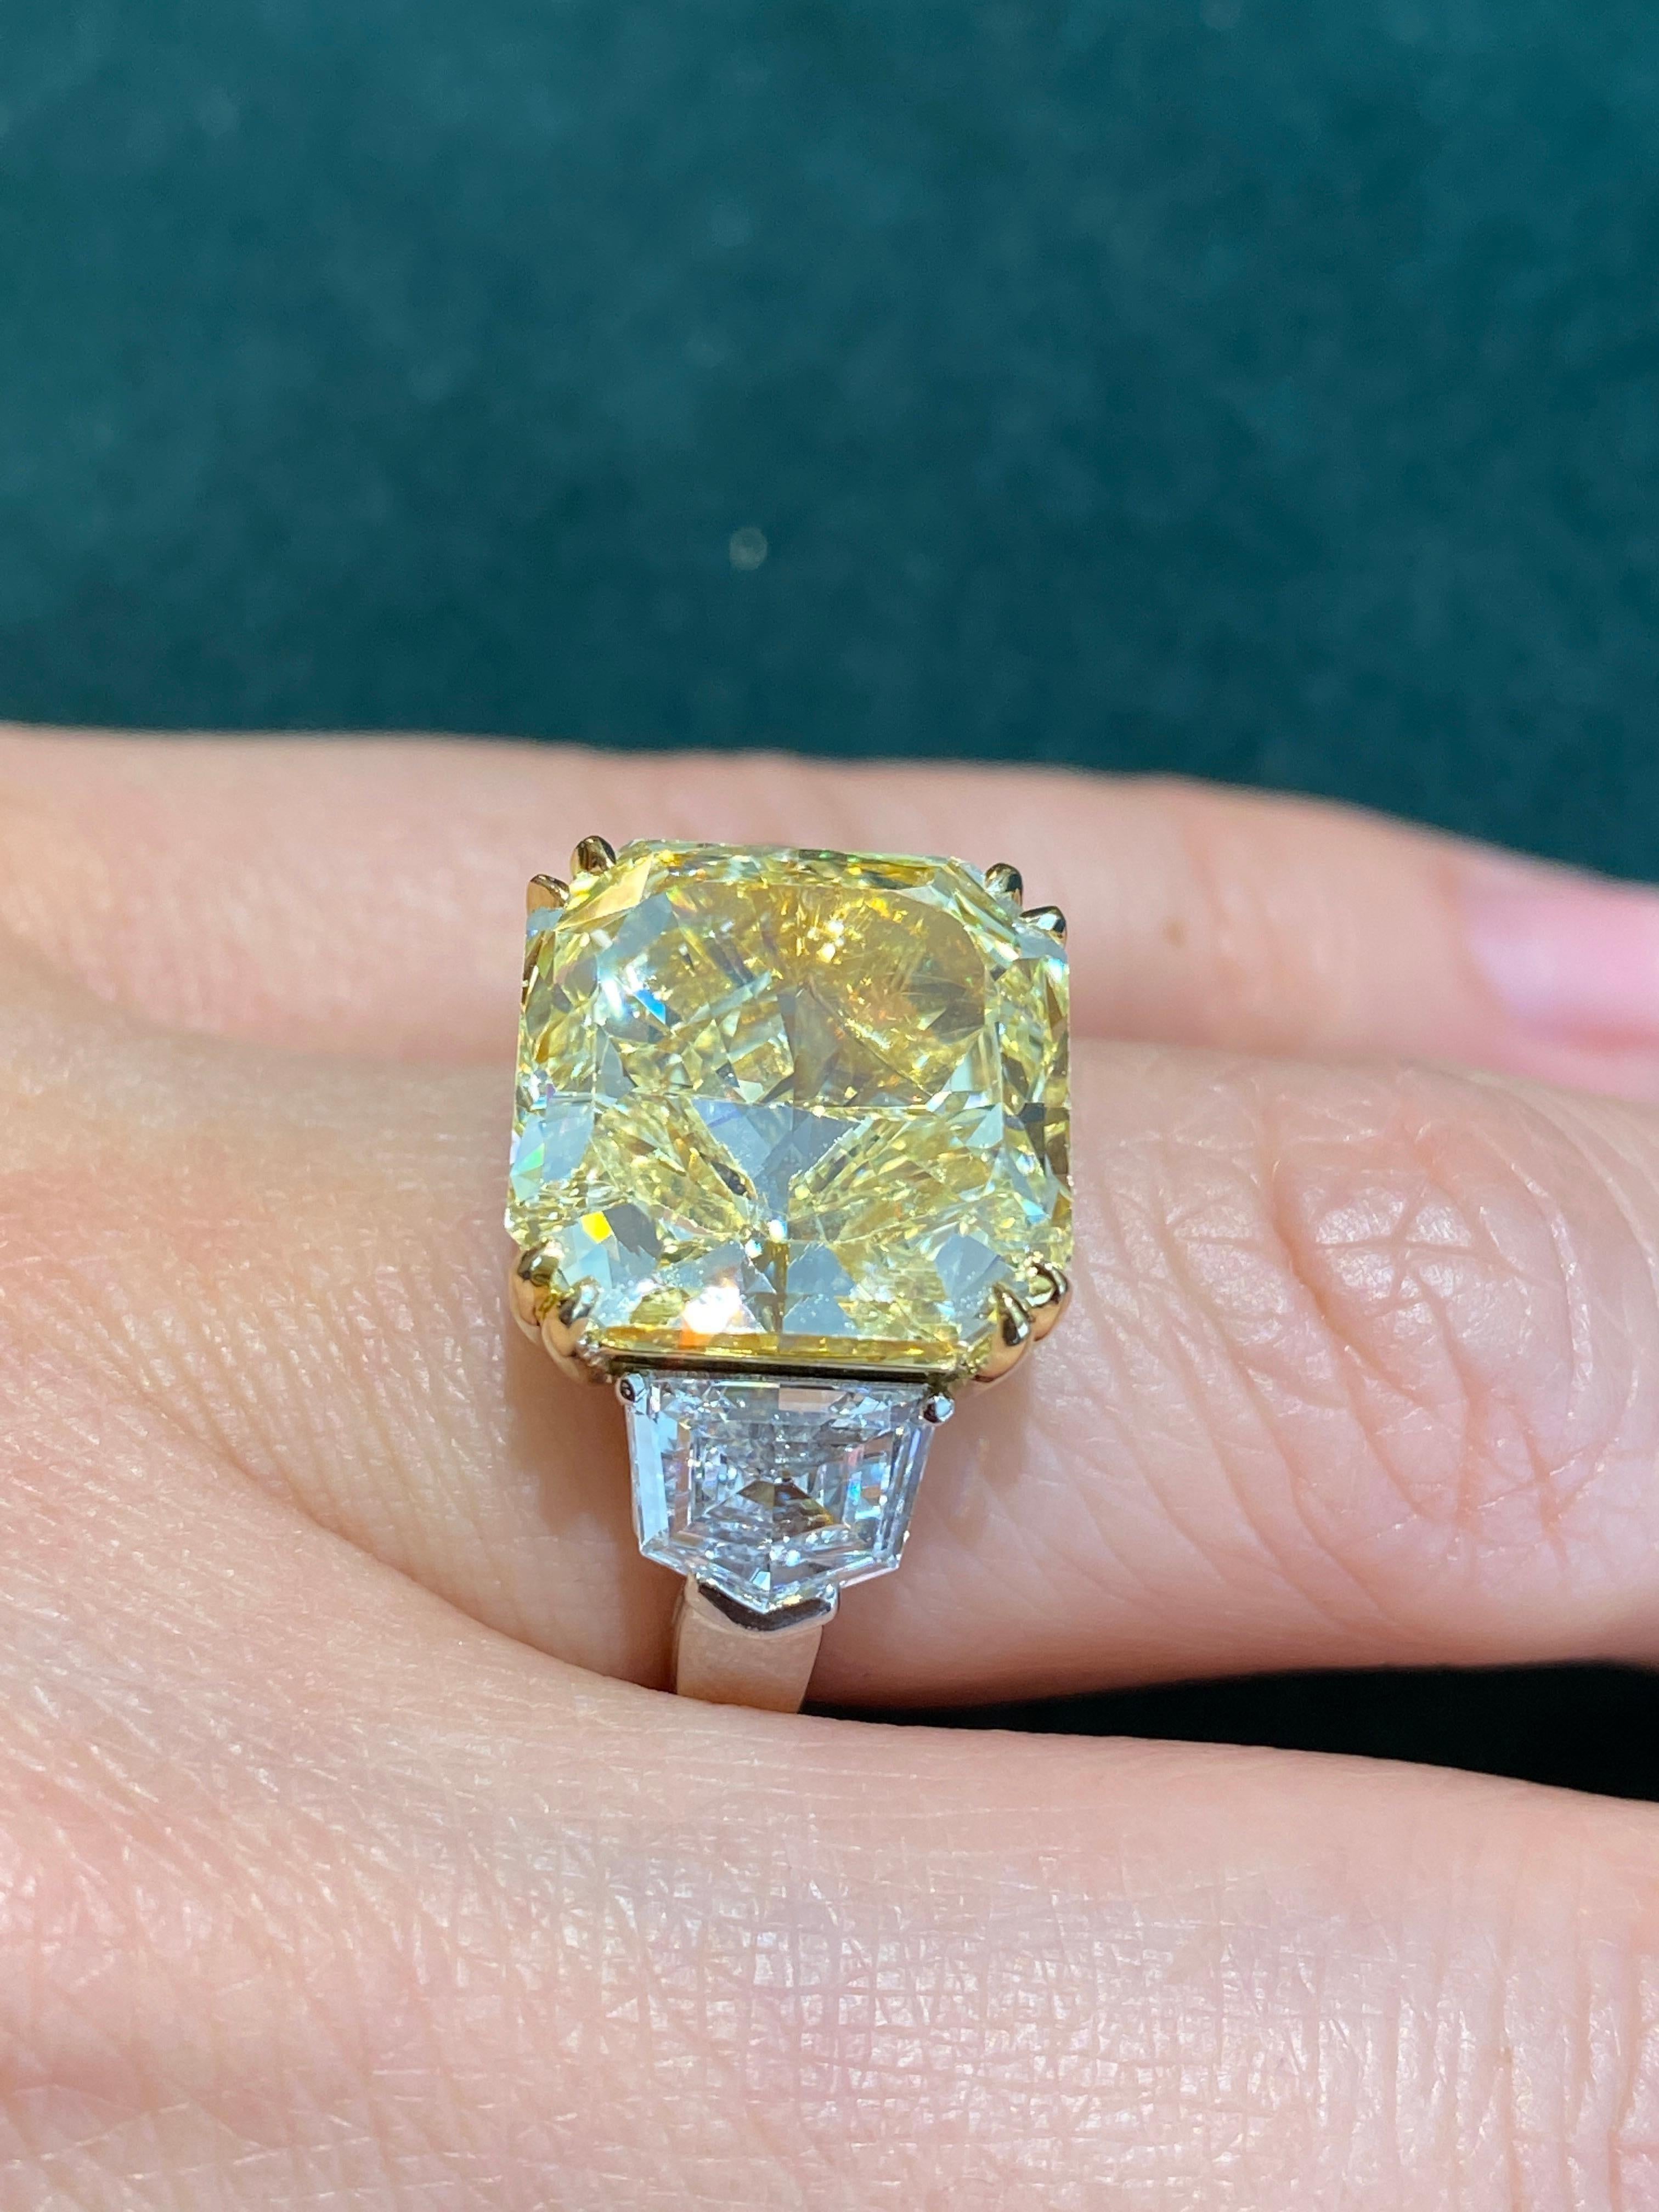 Radiant Cut GIA Certified 10.69 ct Fancy Yellow VVS2 Radiant Diamond Ring in Platinum/18KYG For Sale